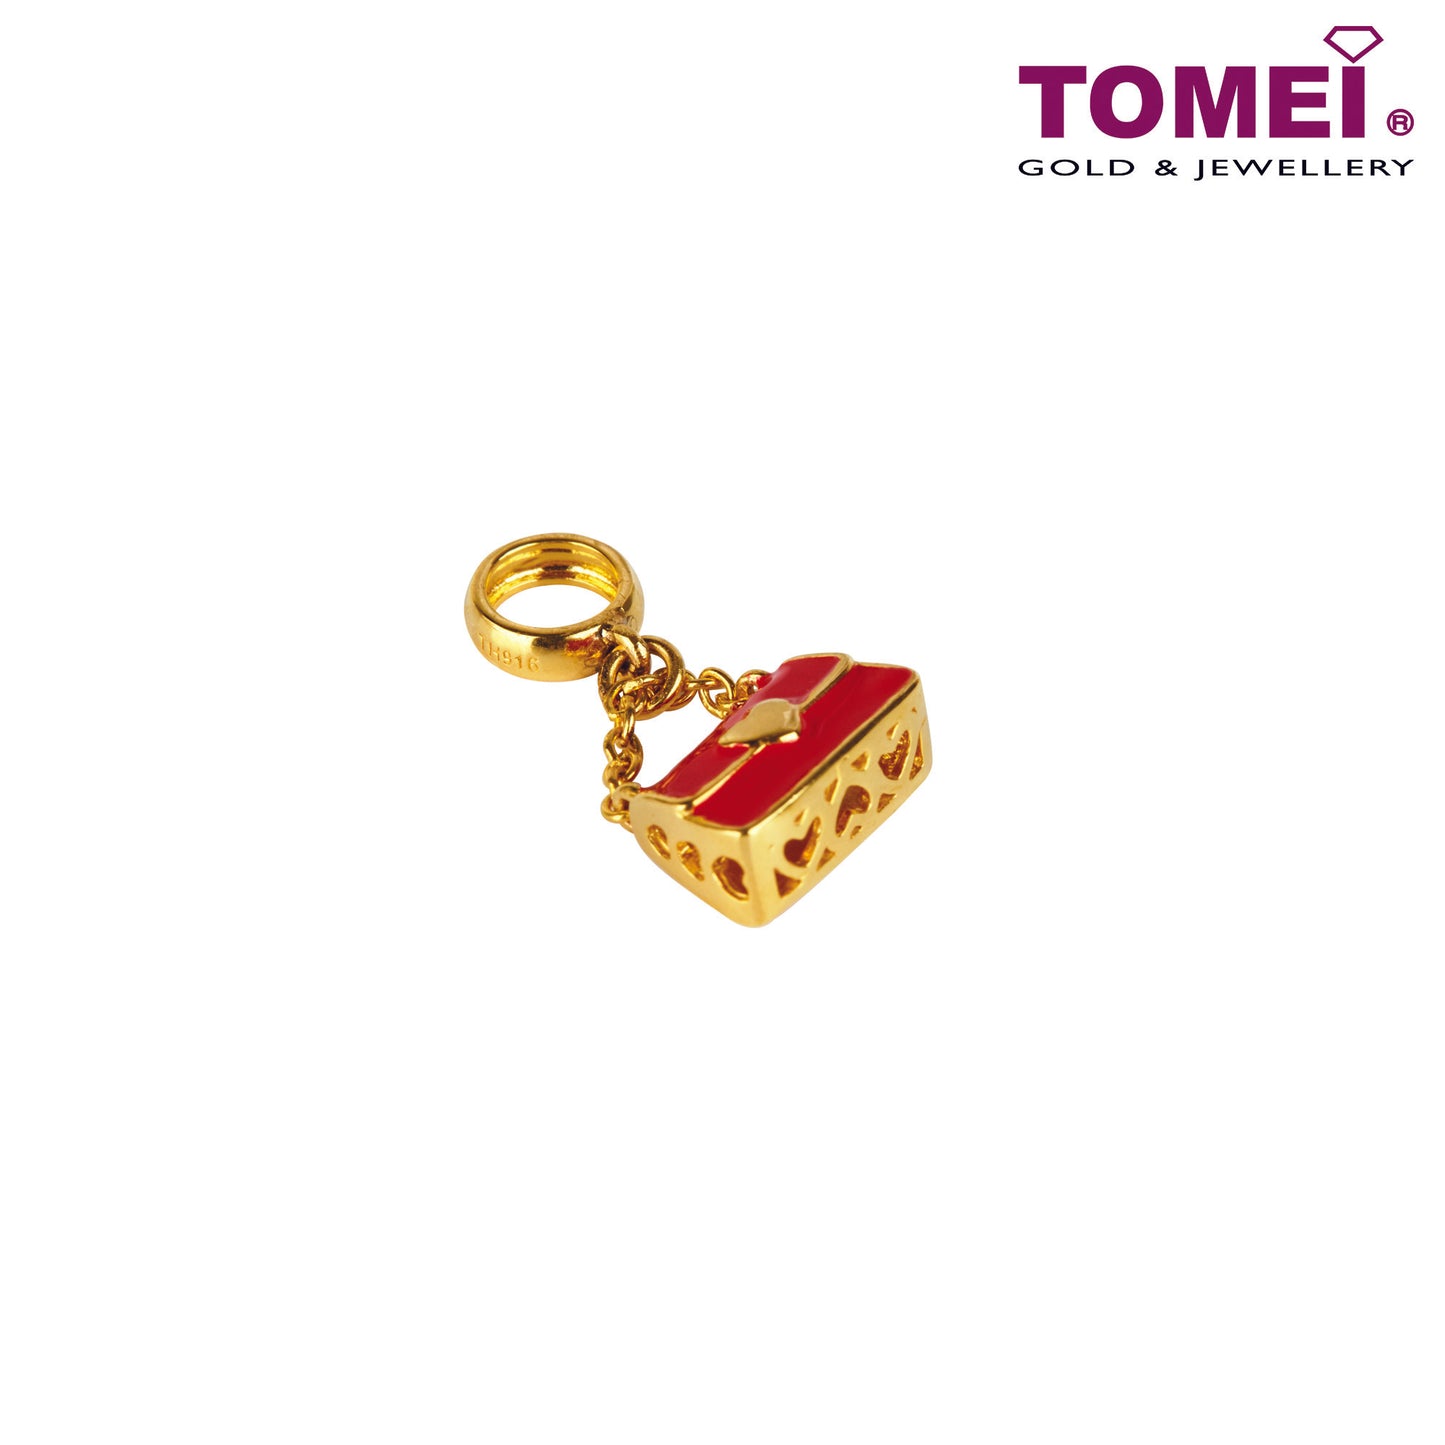 TOMEI Snazzy with Sensations in Red Handbag Charm, Yellow Gold 916 (TM-YG0817P-EC)